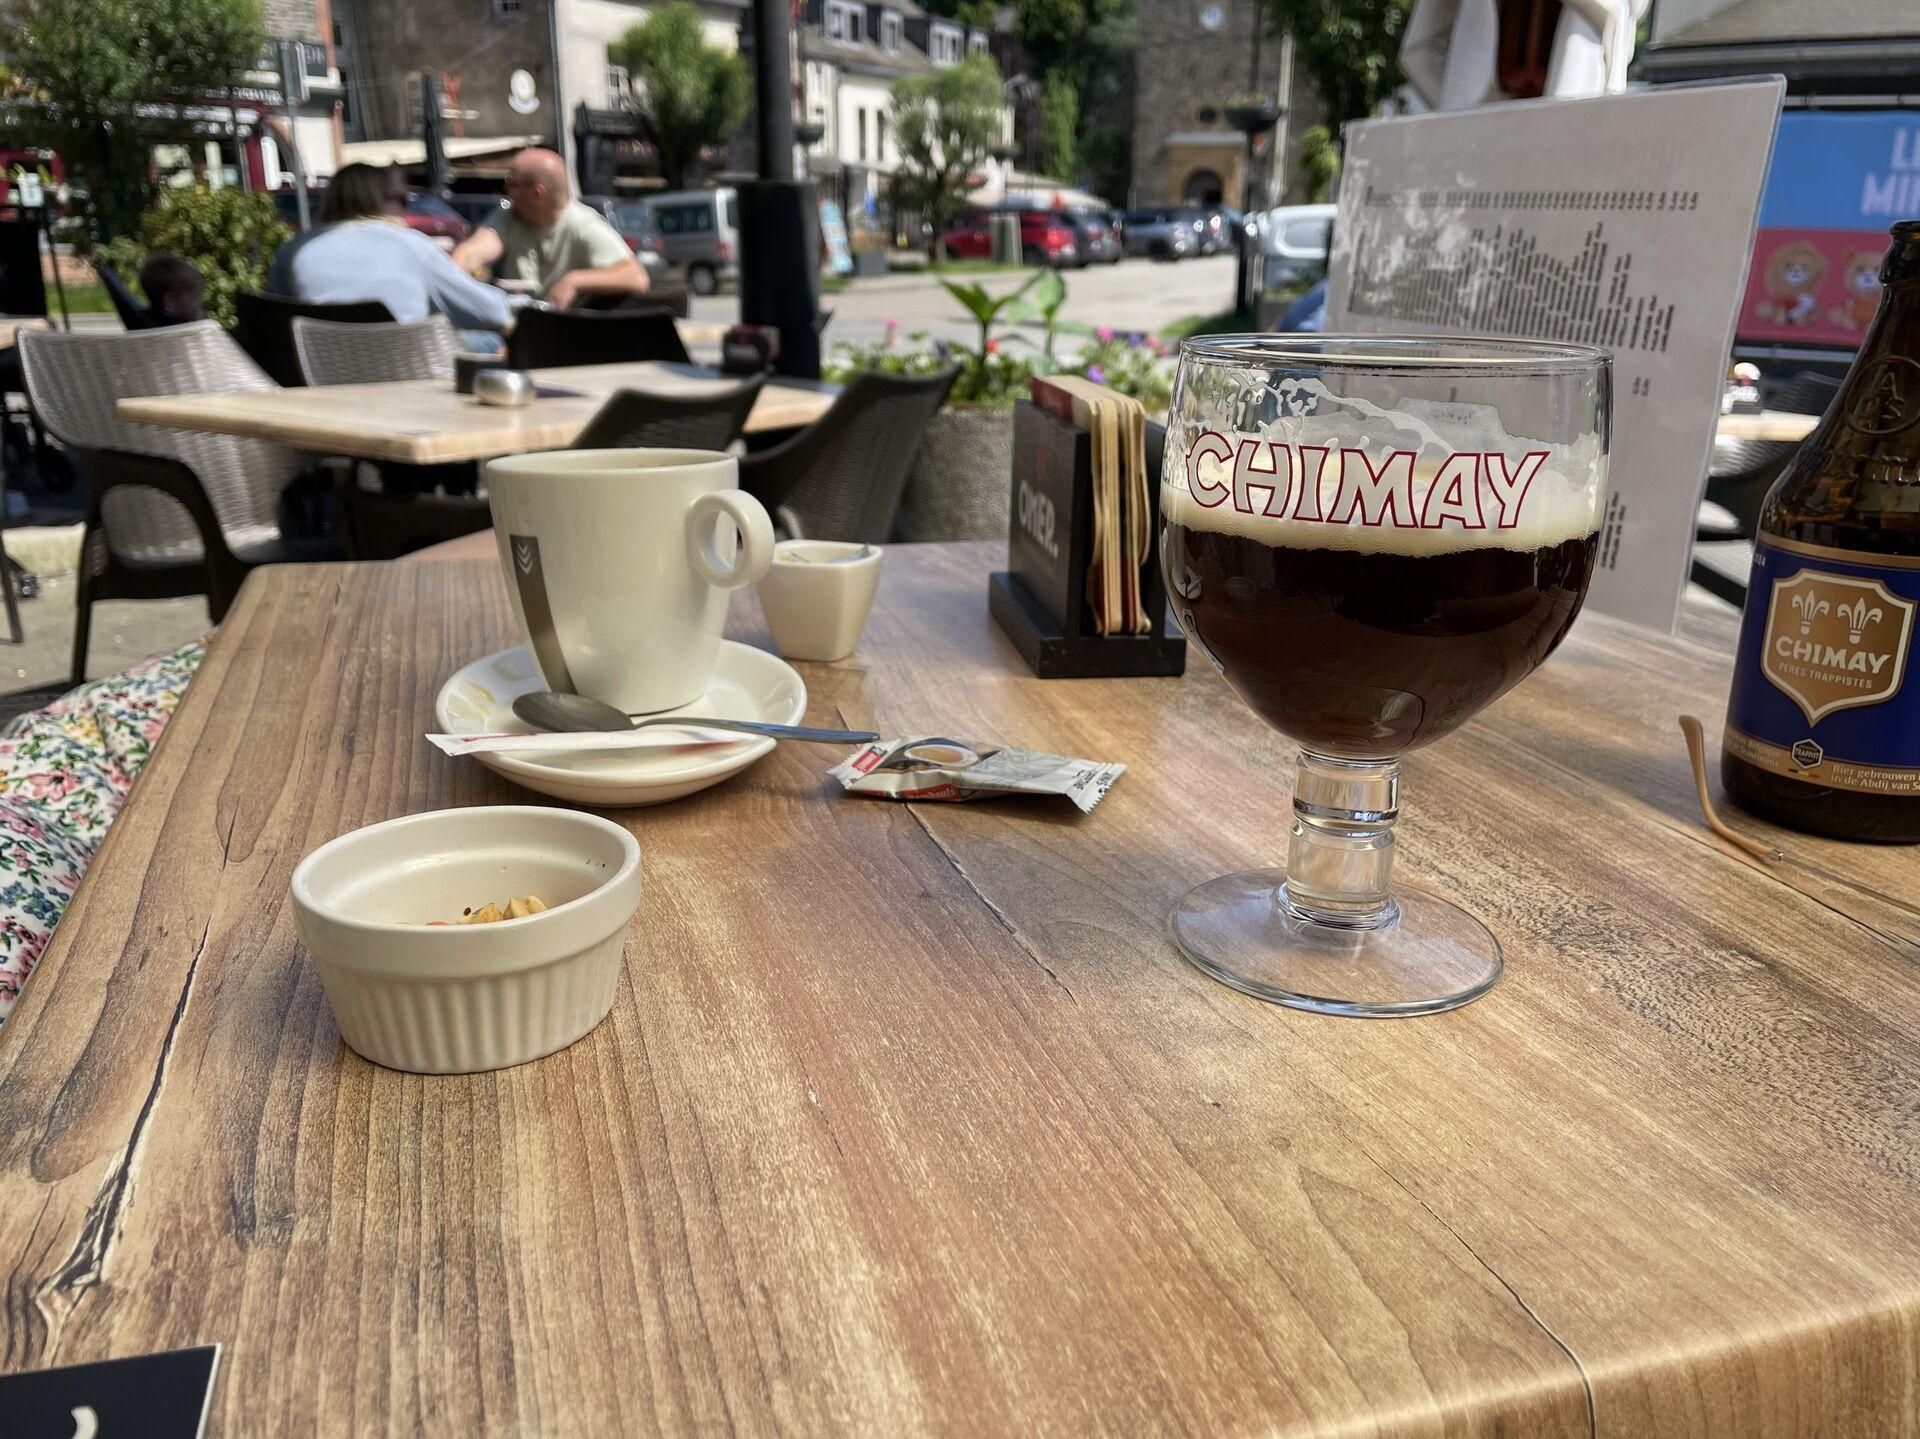 A half-finished glass of Chimay with a grande cafe and a little terrine of nuts at a cafe on the sidewalk in Bohan-sur-Semois